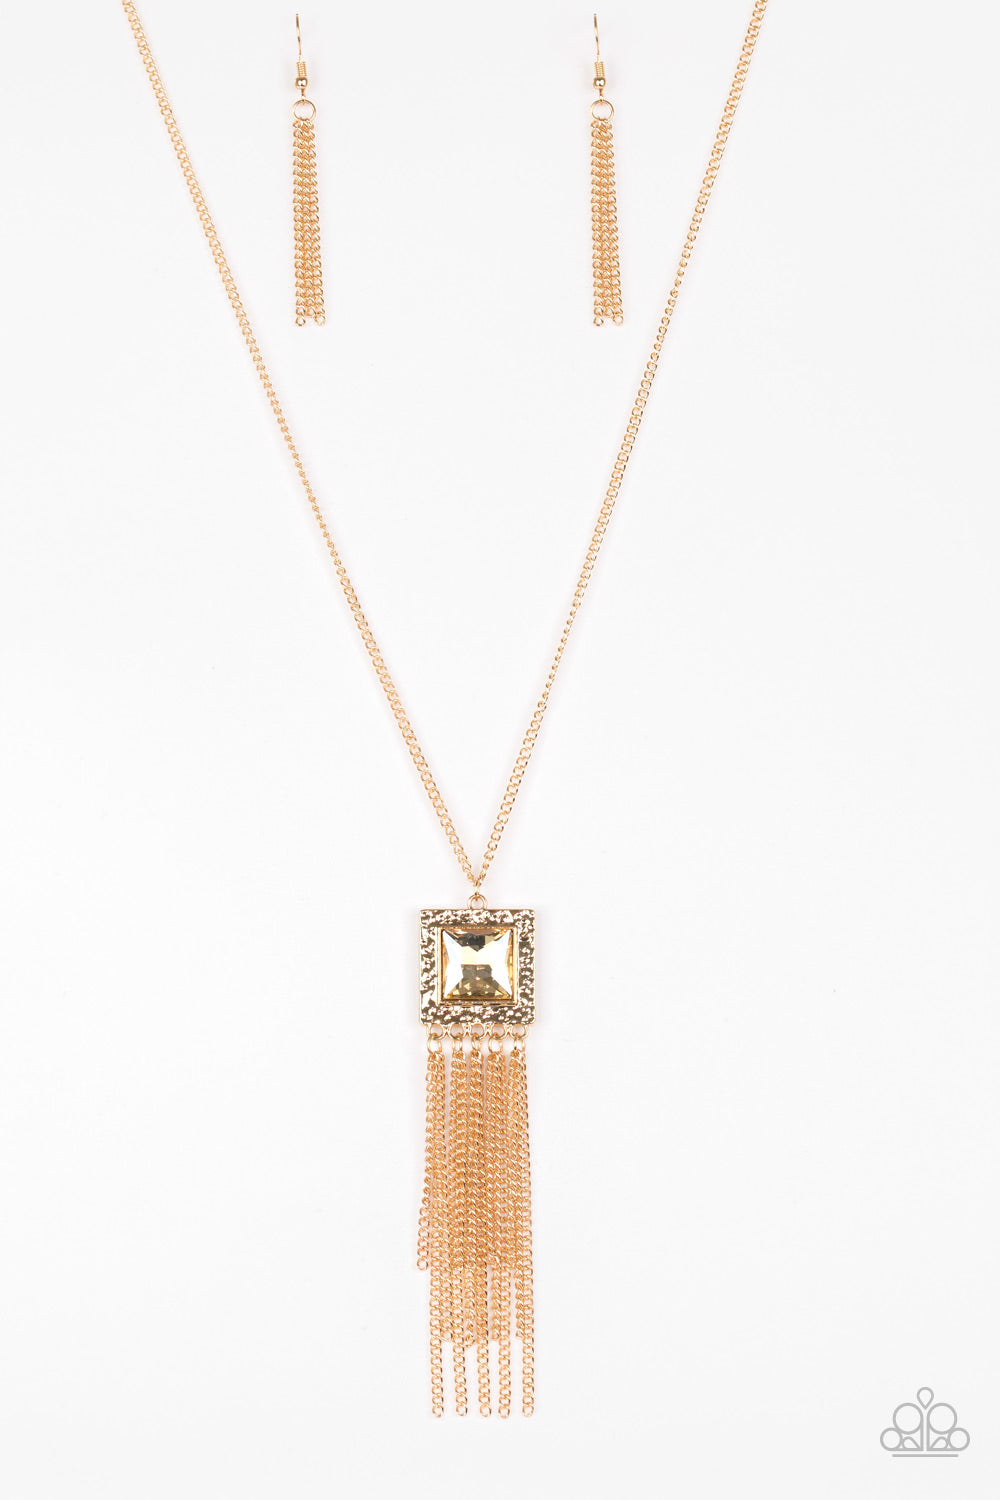 Paparazzi Empire State Shimmer - Gold necklace